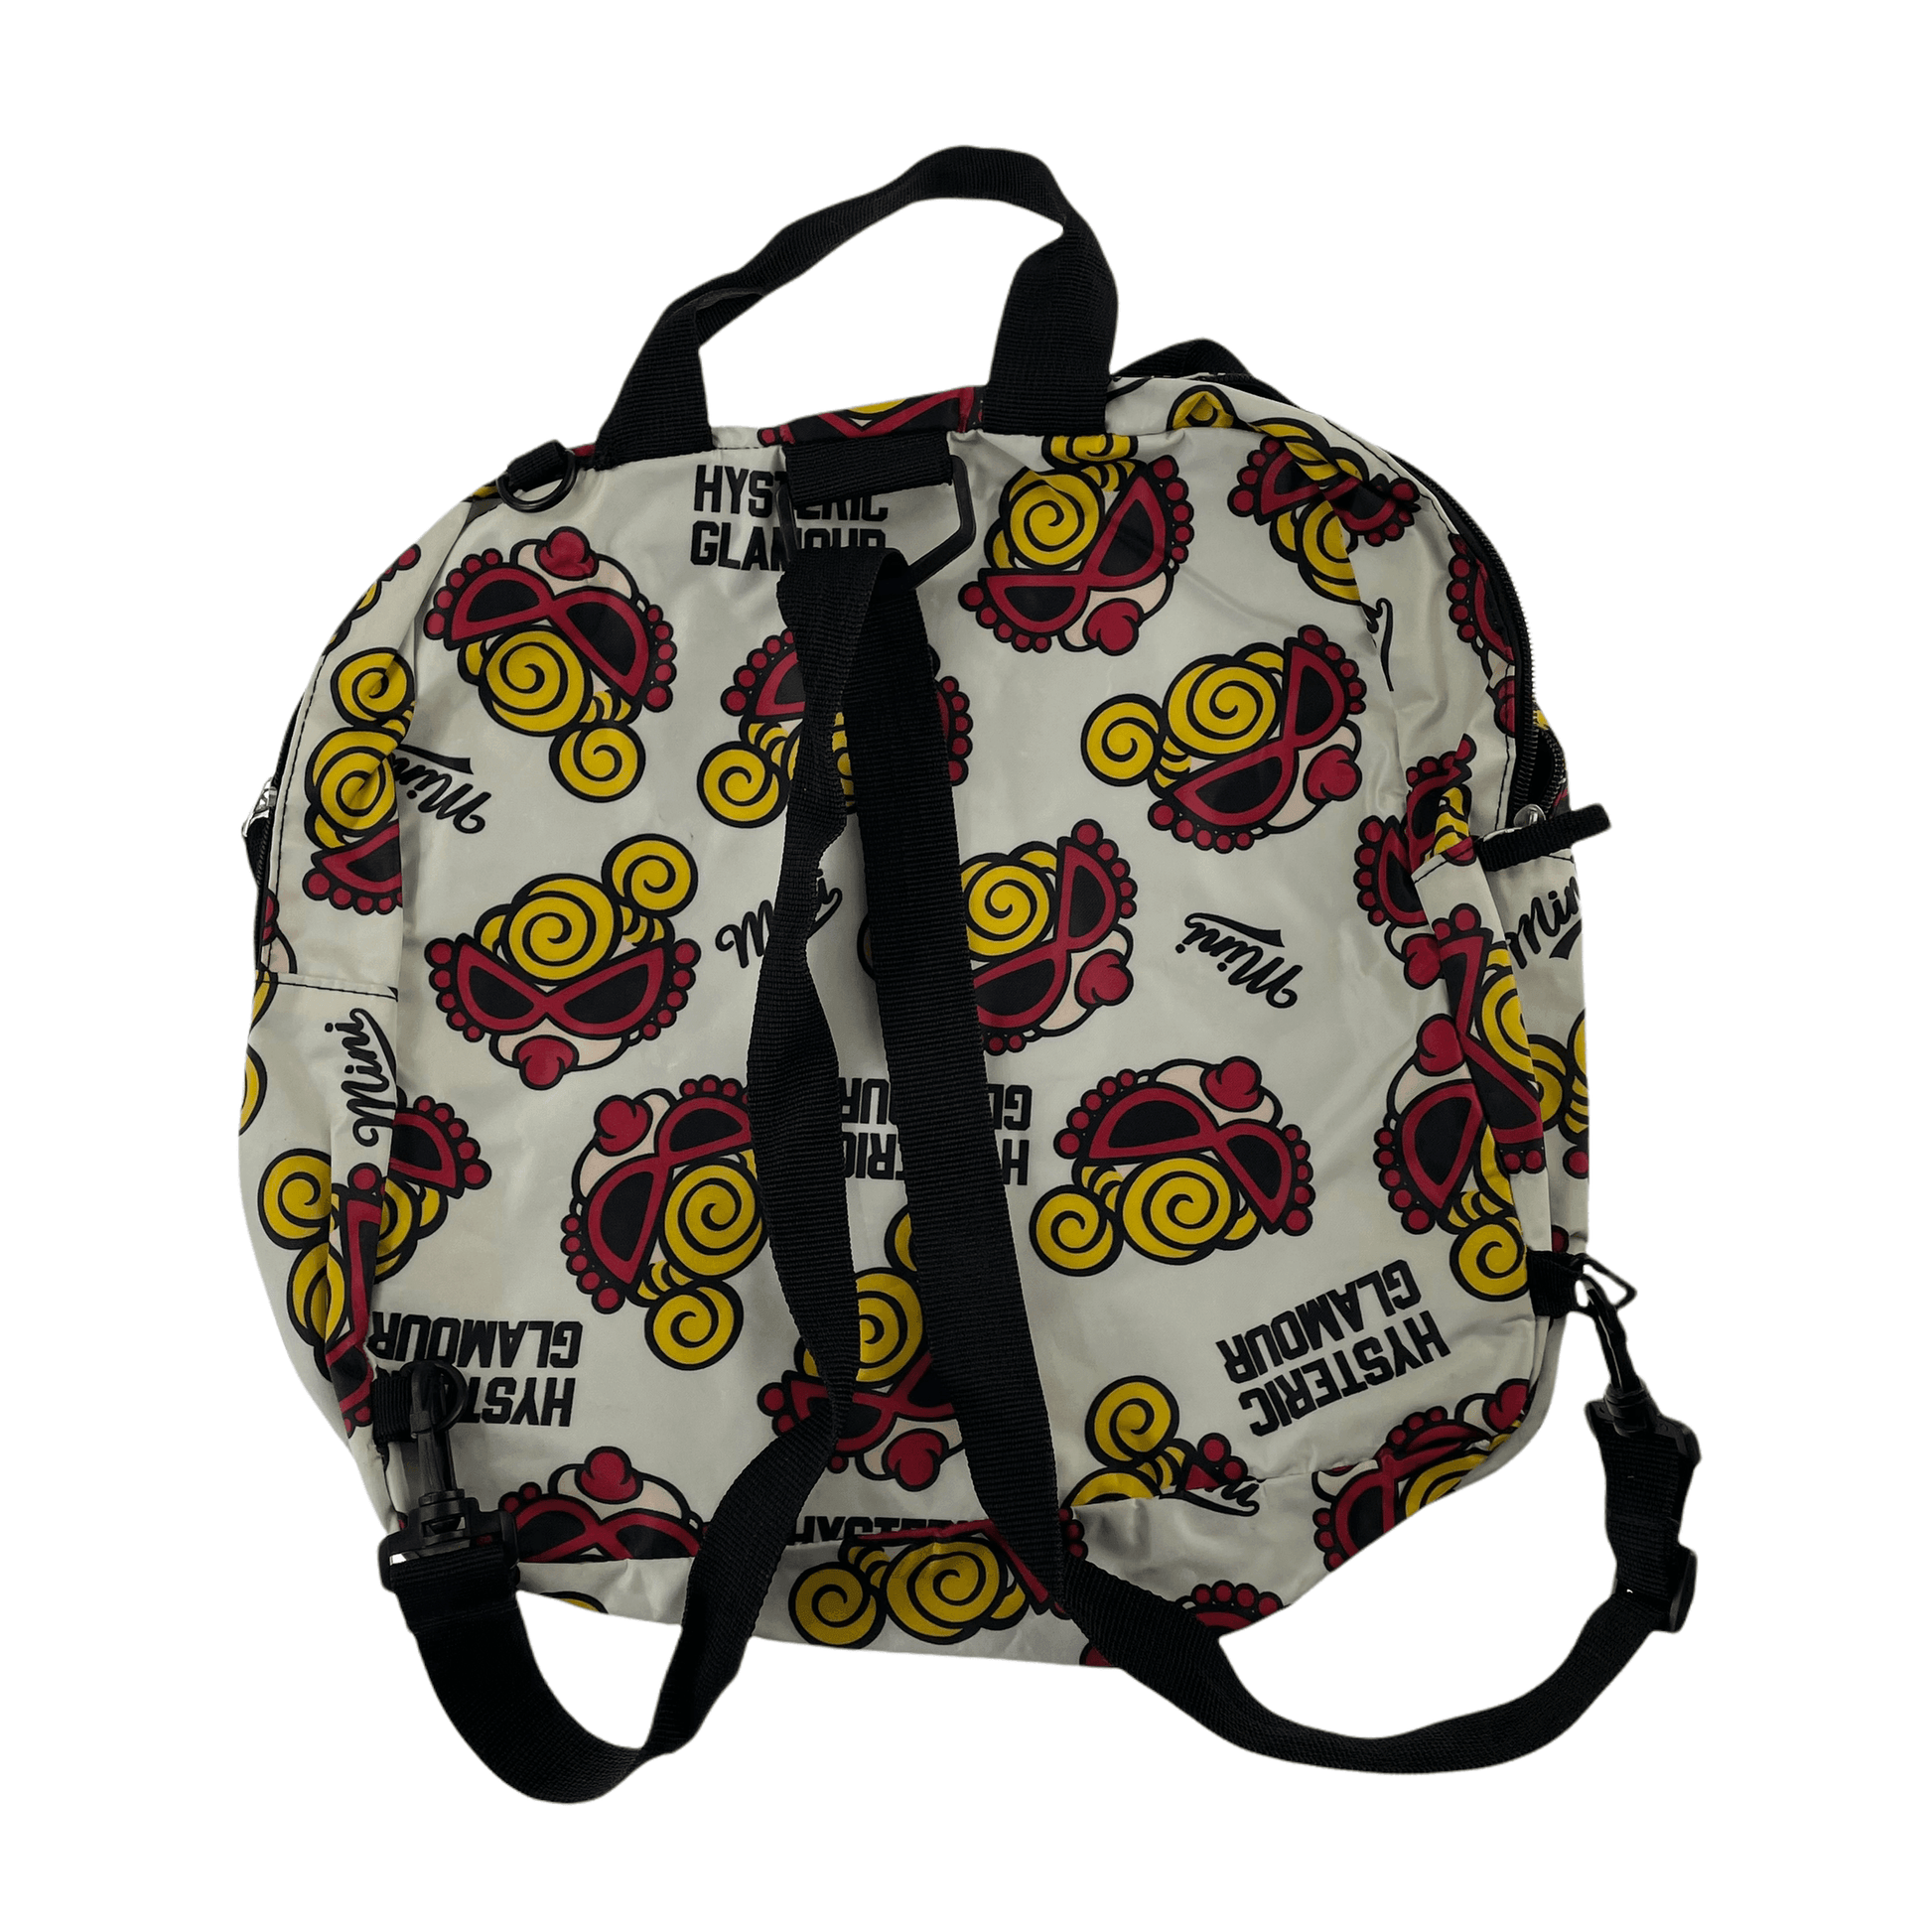 Hysteric Glamour doll print backpack rucksack bag - Known Source